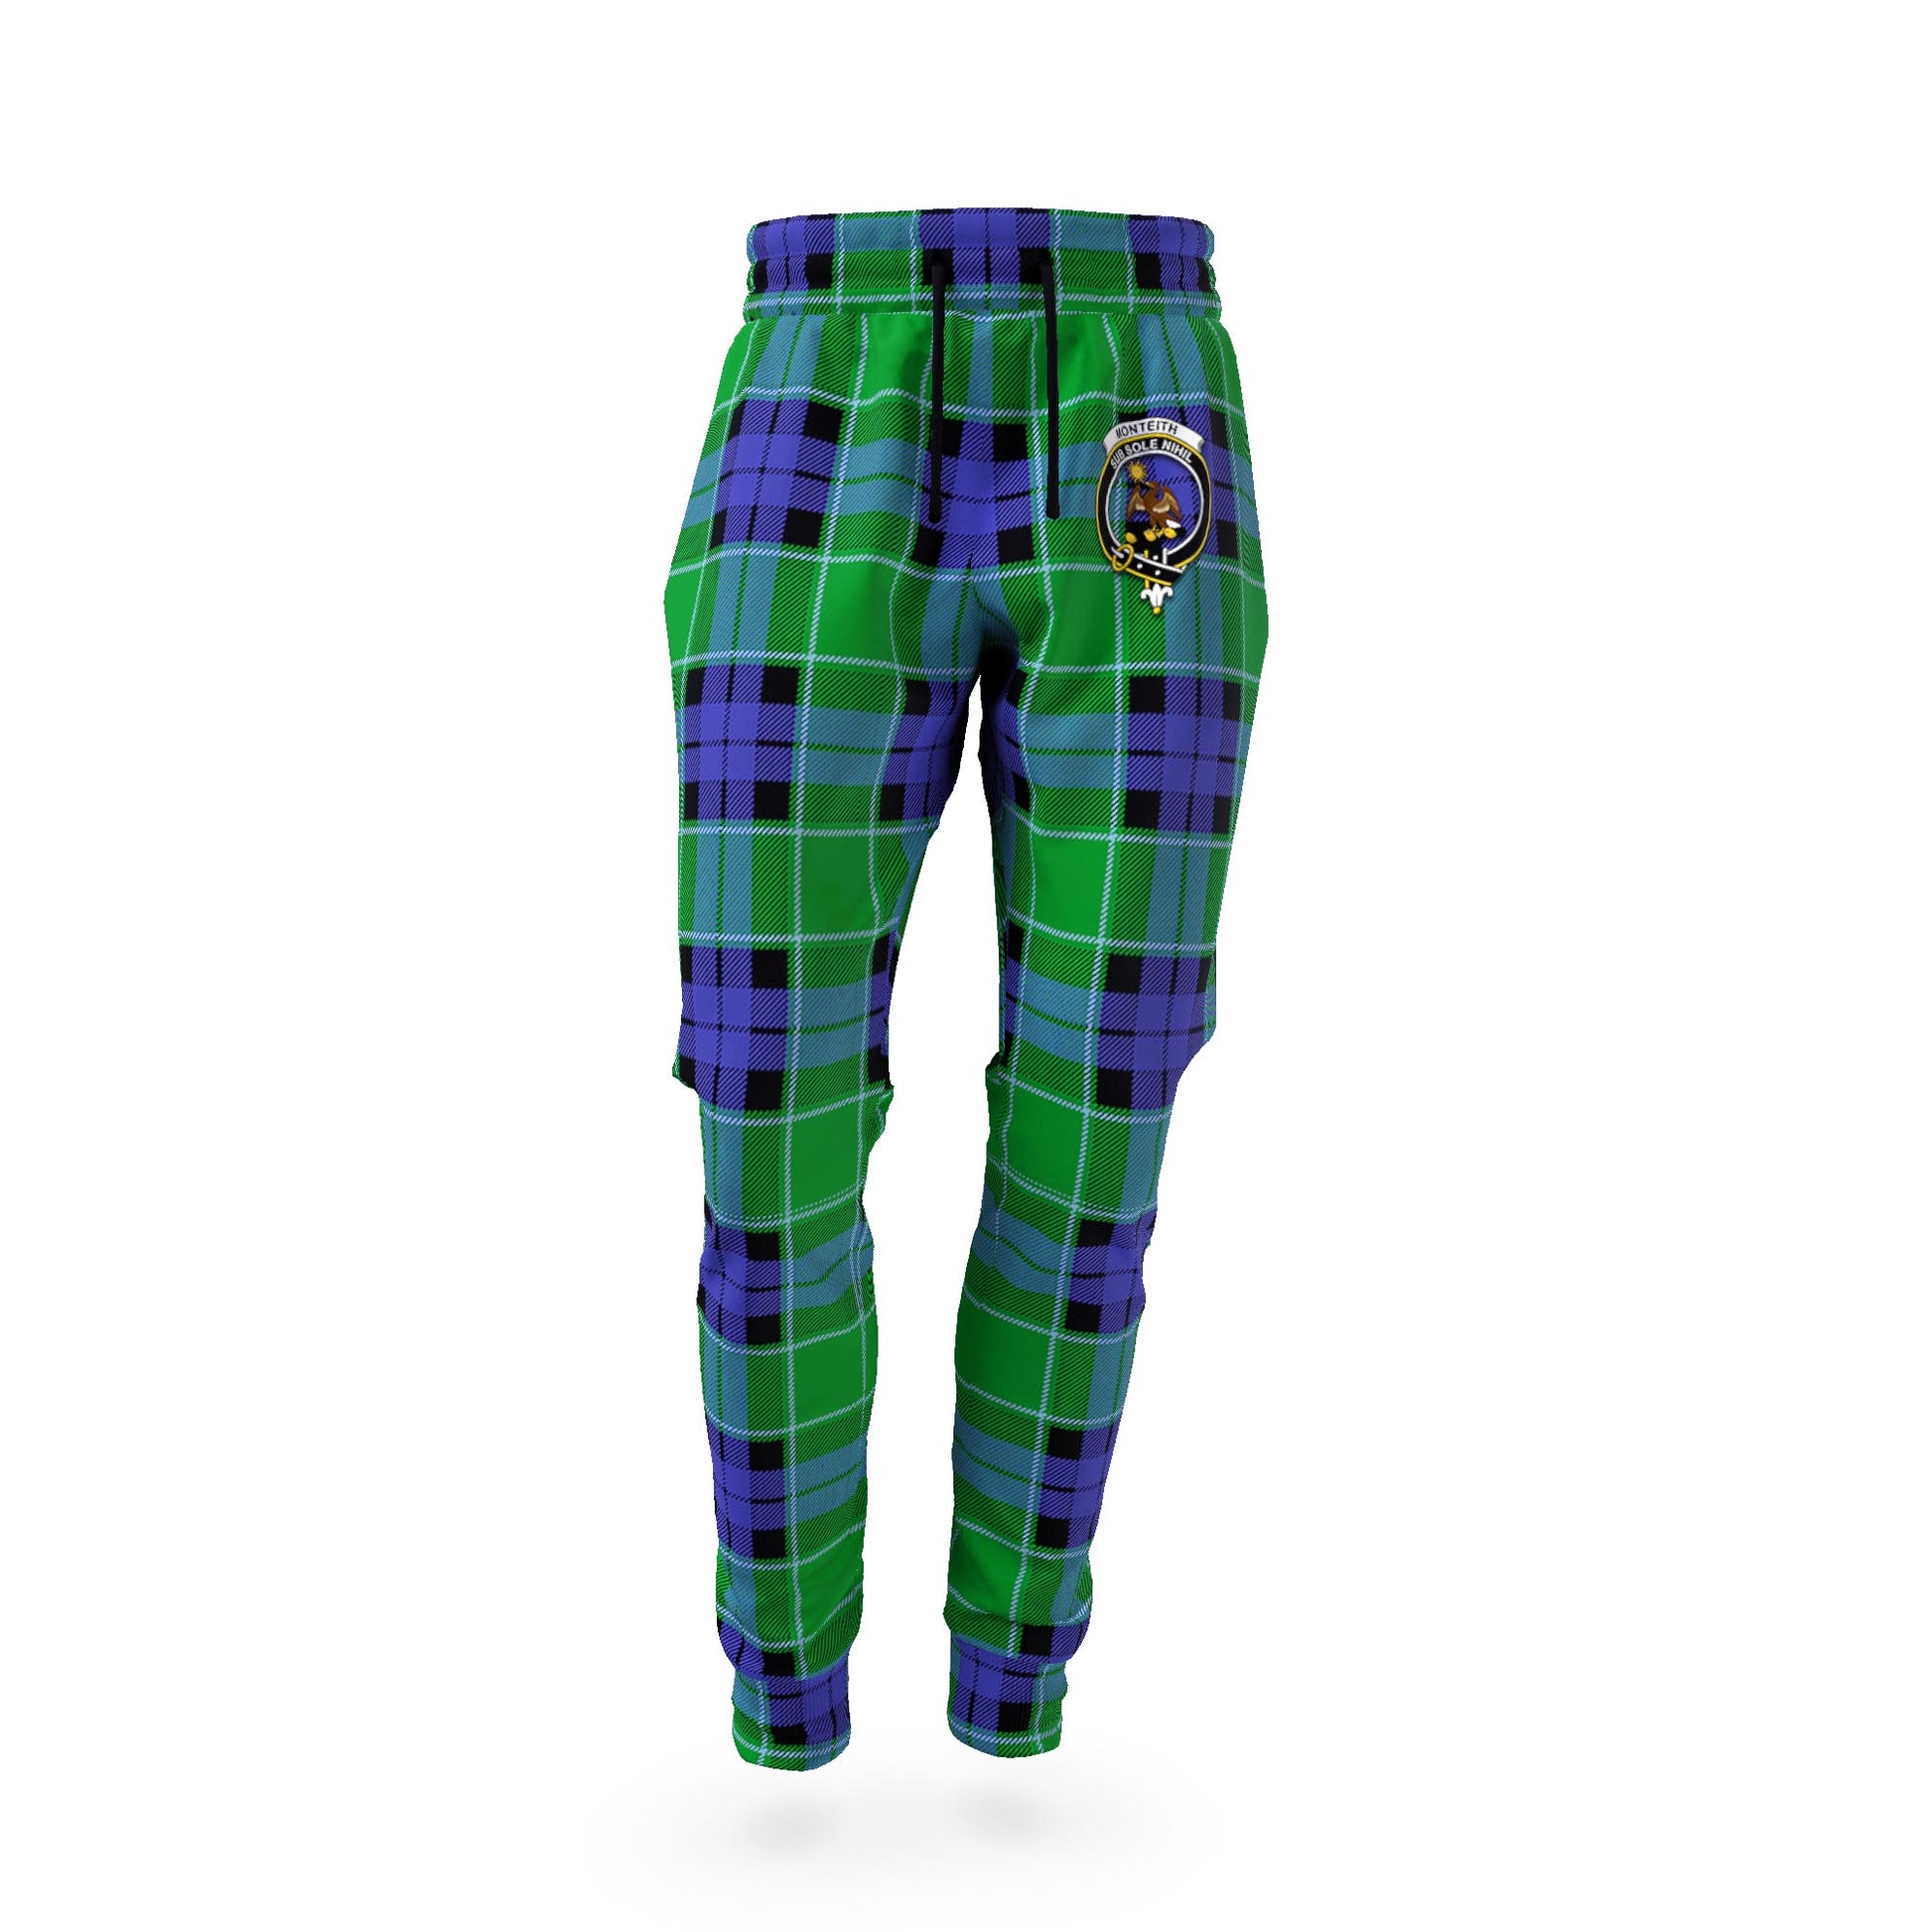 Monteith Tartan Joggers Pants with Family Crest - Tartanvibesclothing